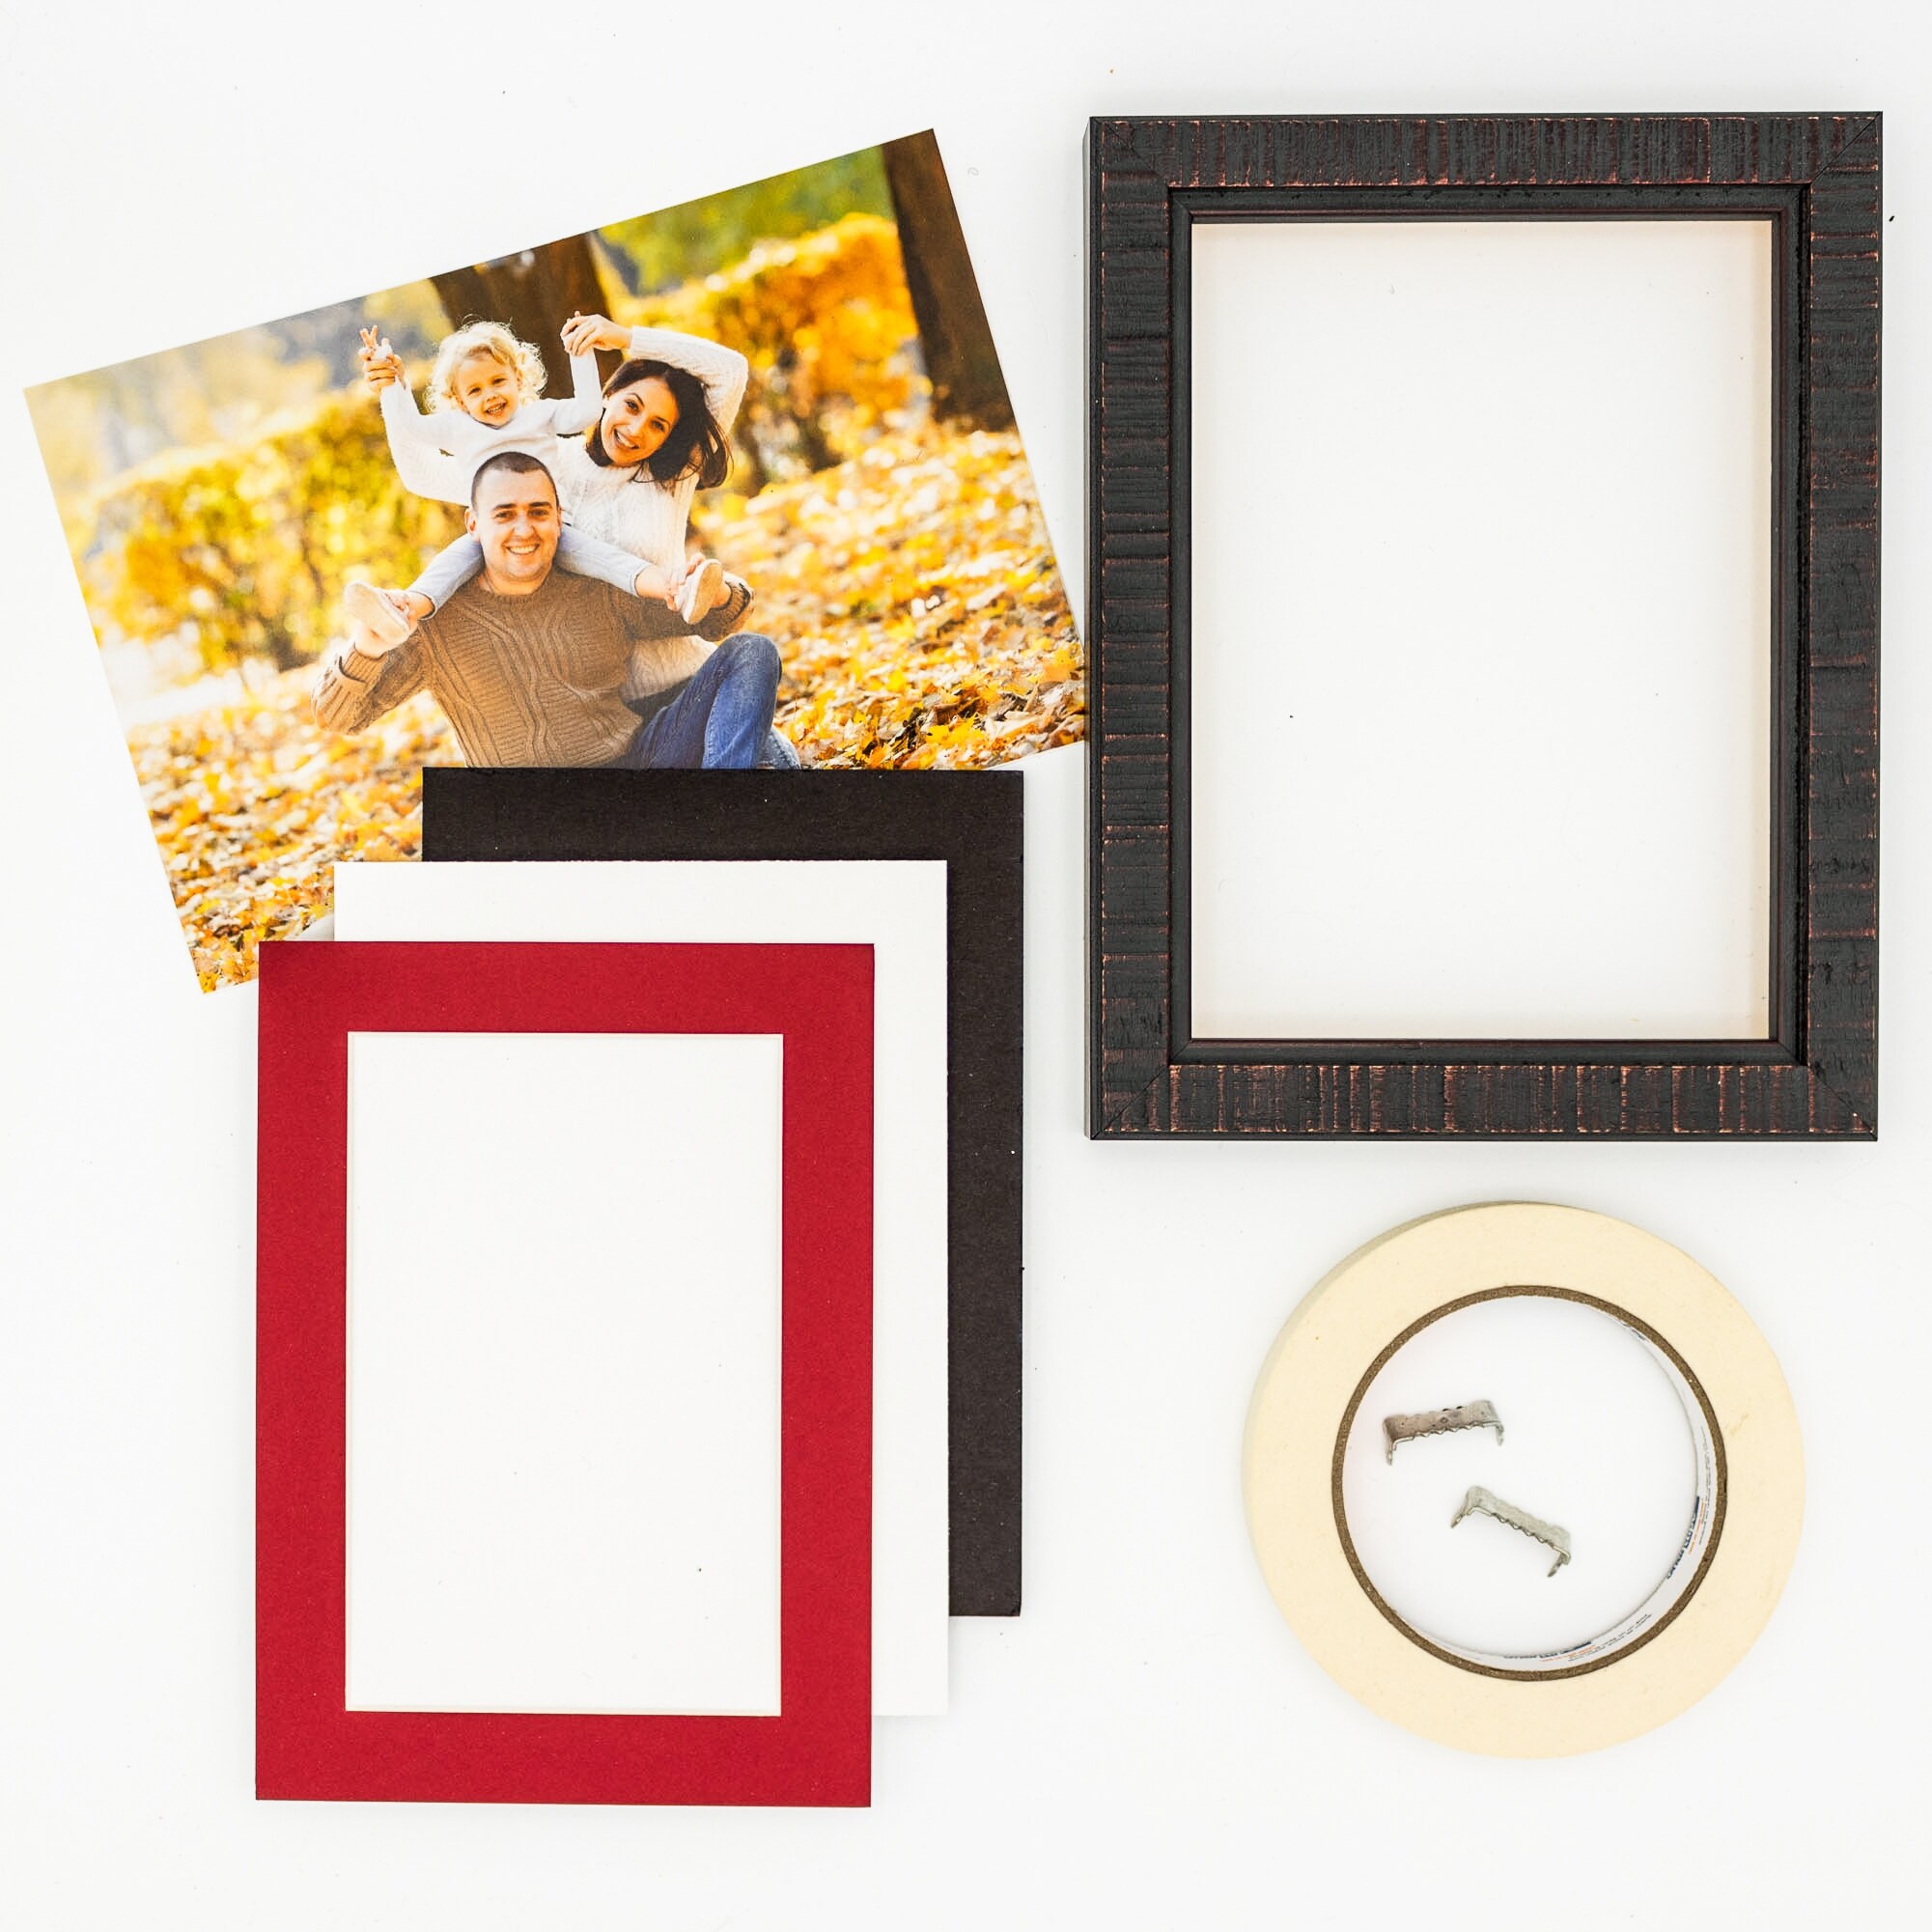 13x16 Black Picture Frame with 10.5x13.5 Black Mat Opening for